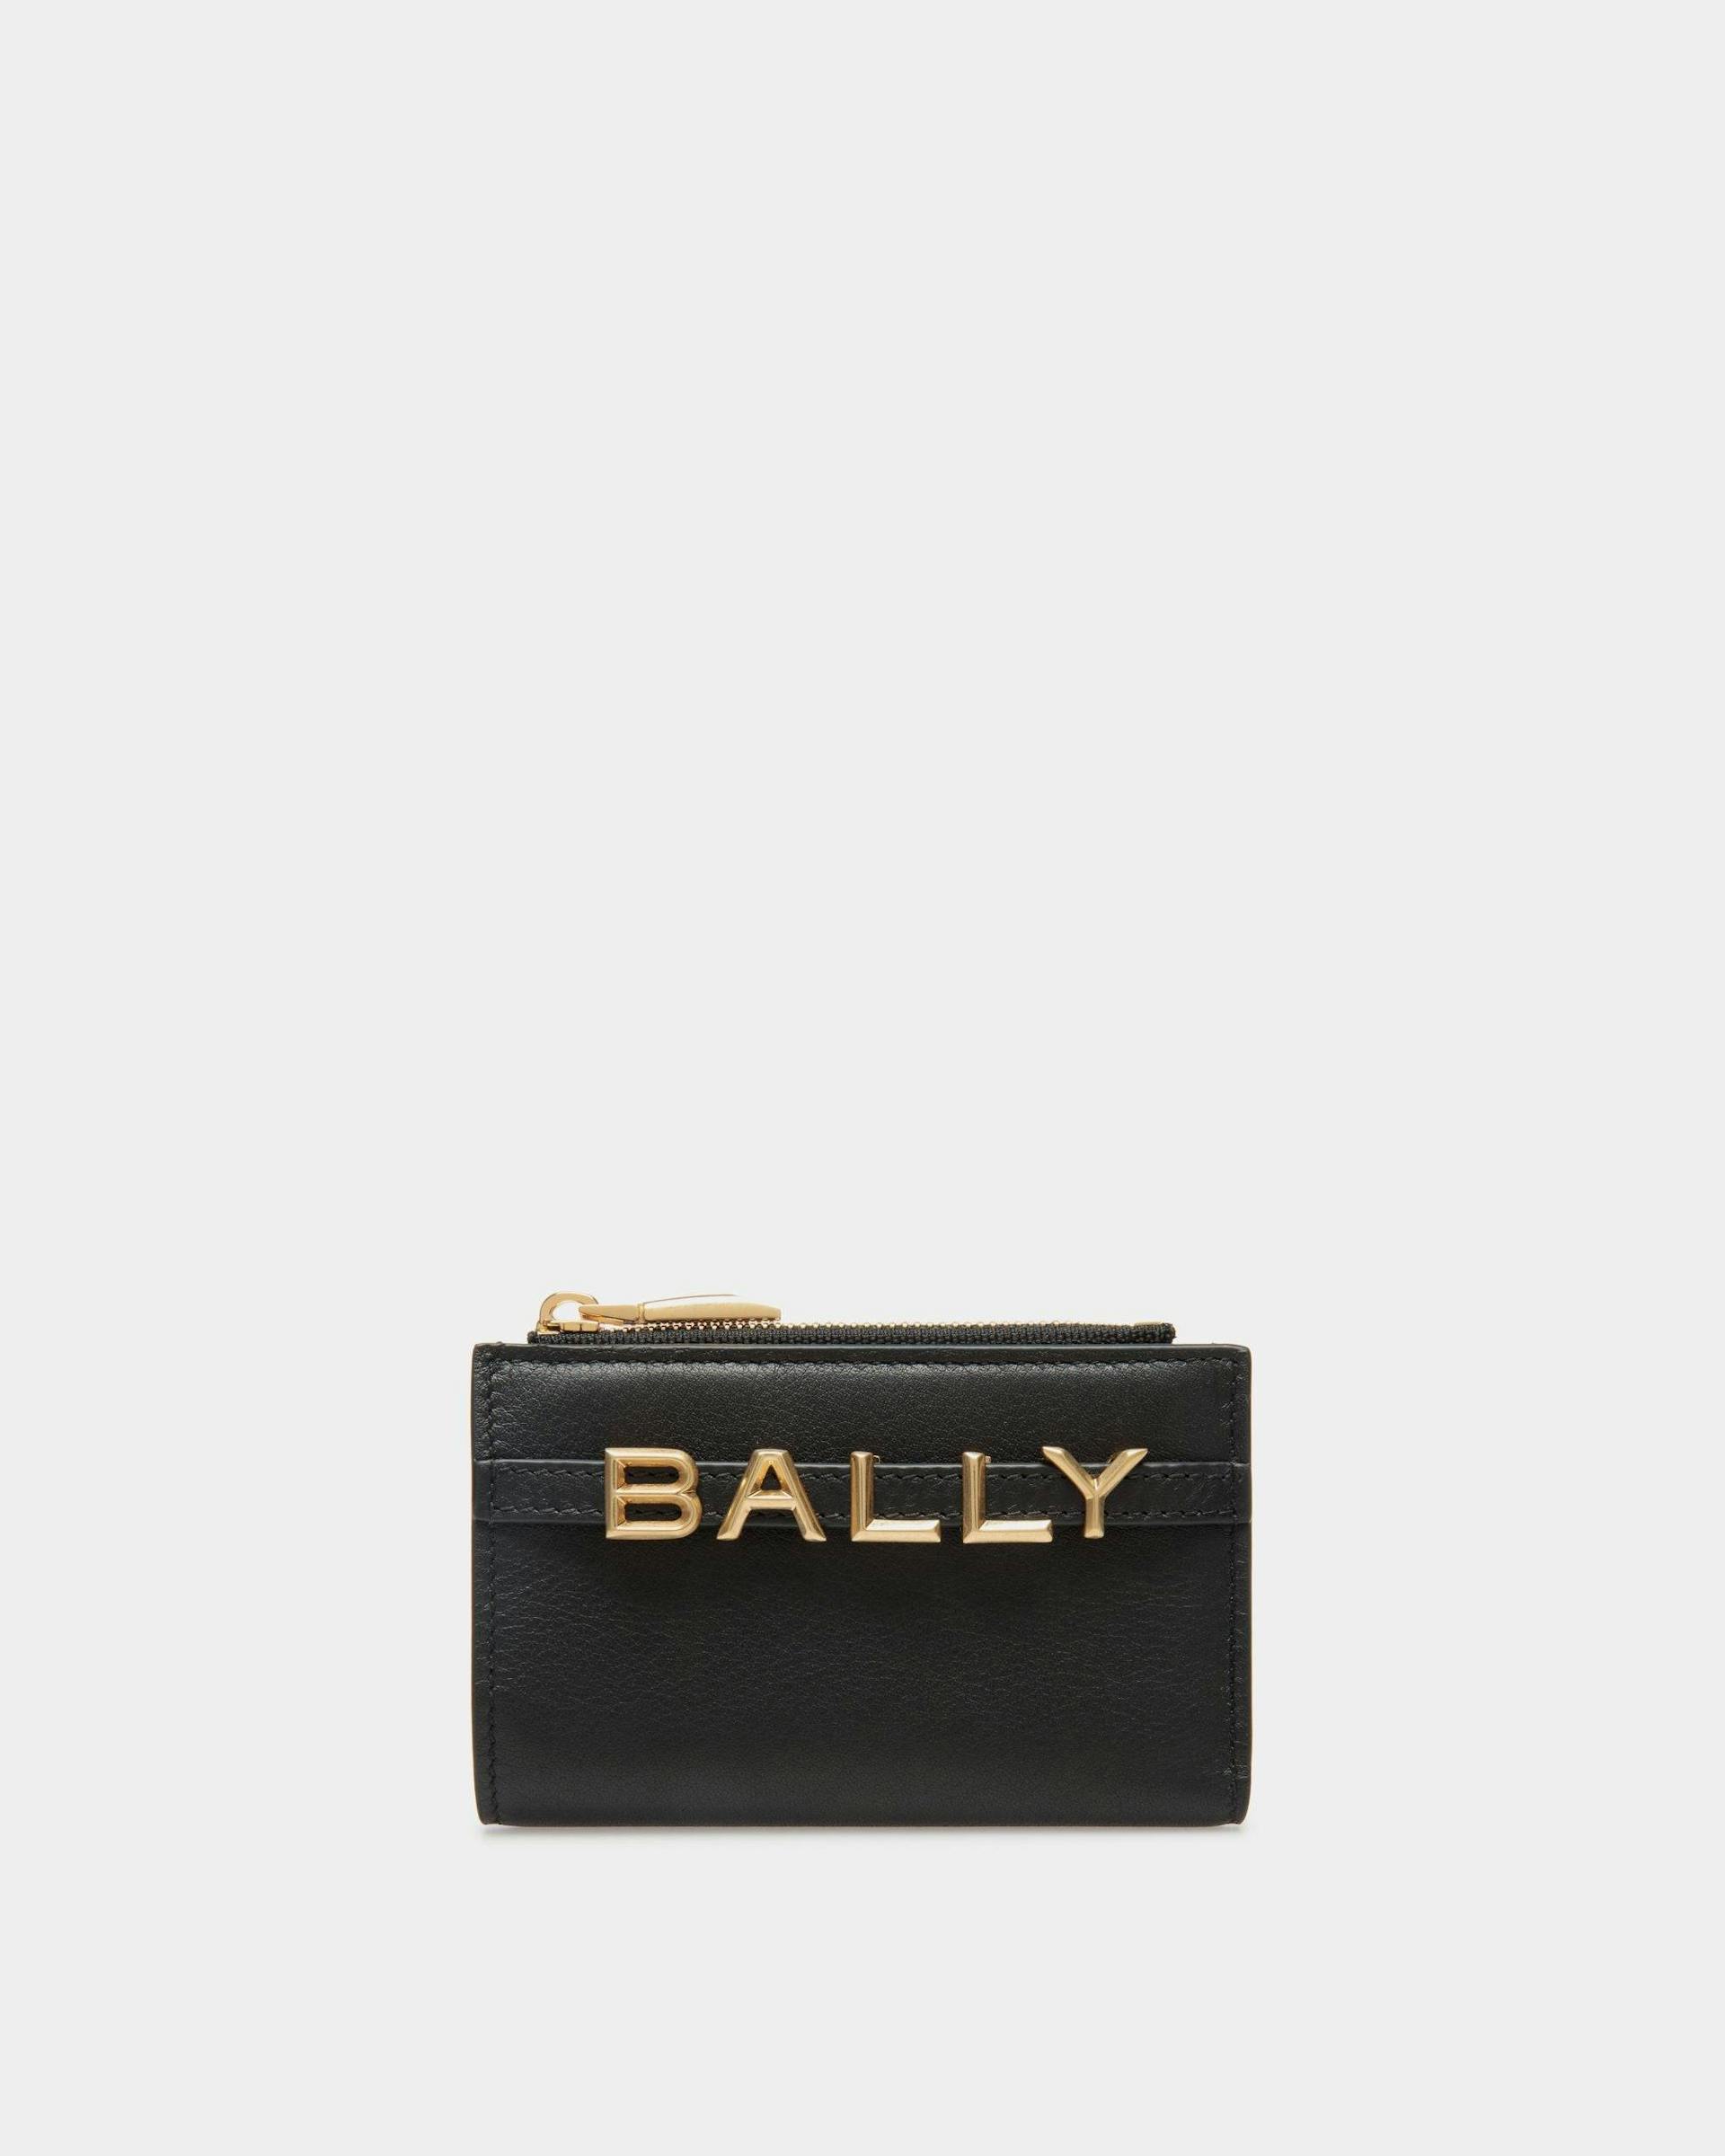 Women's Bally Spell Wallet in Black Leather | Bally | Still Life Front